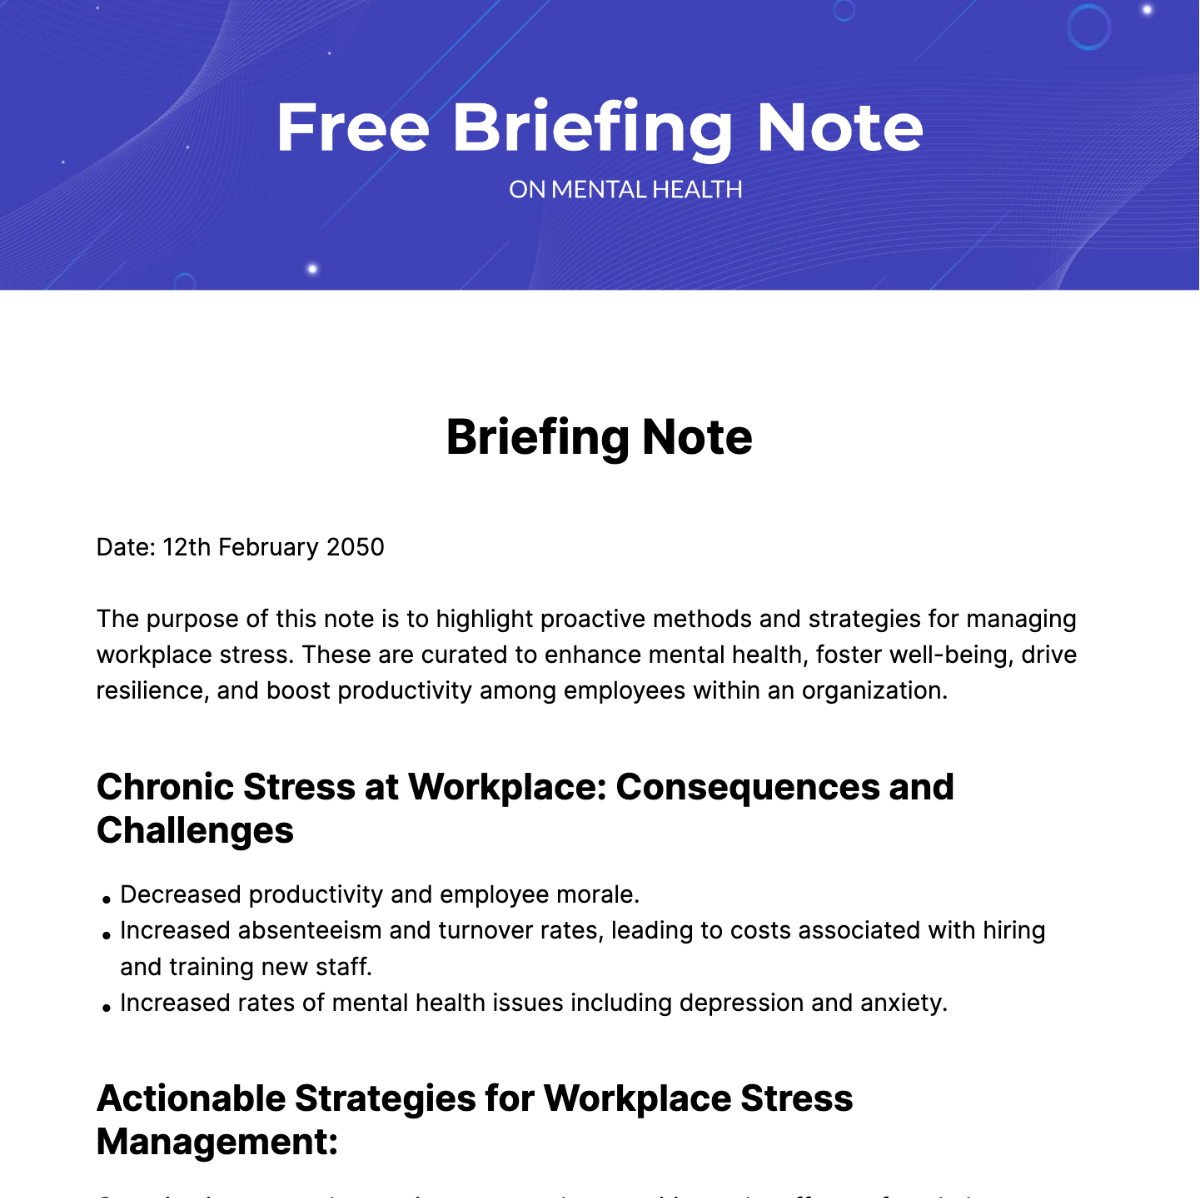 Free Briefing Note on Mental Health Template